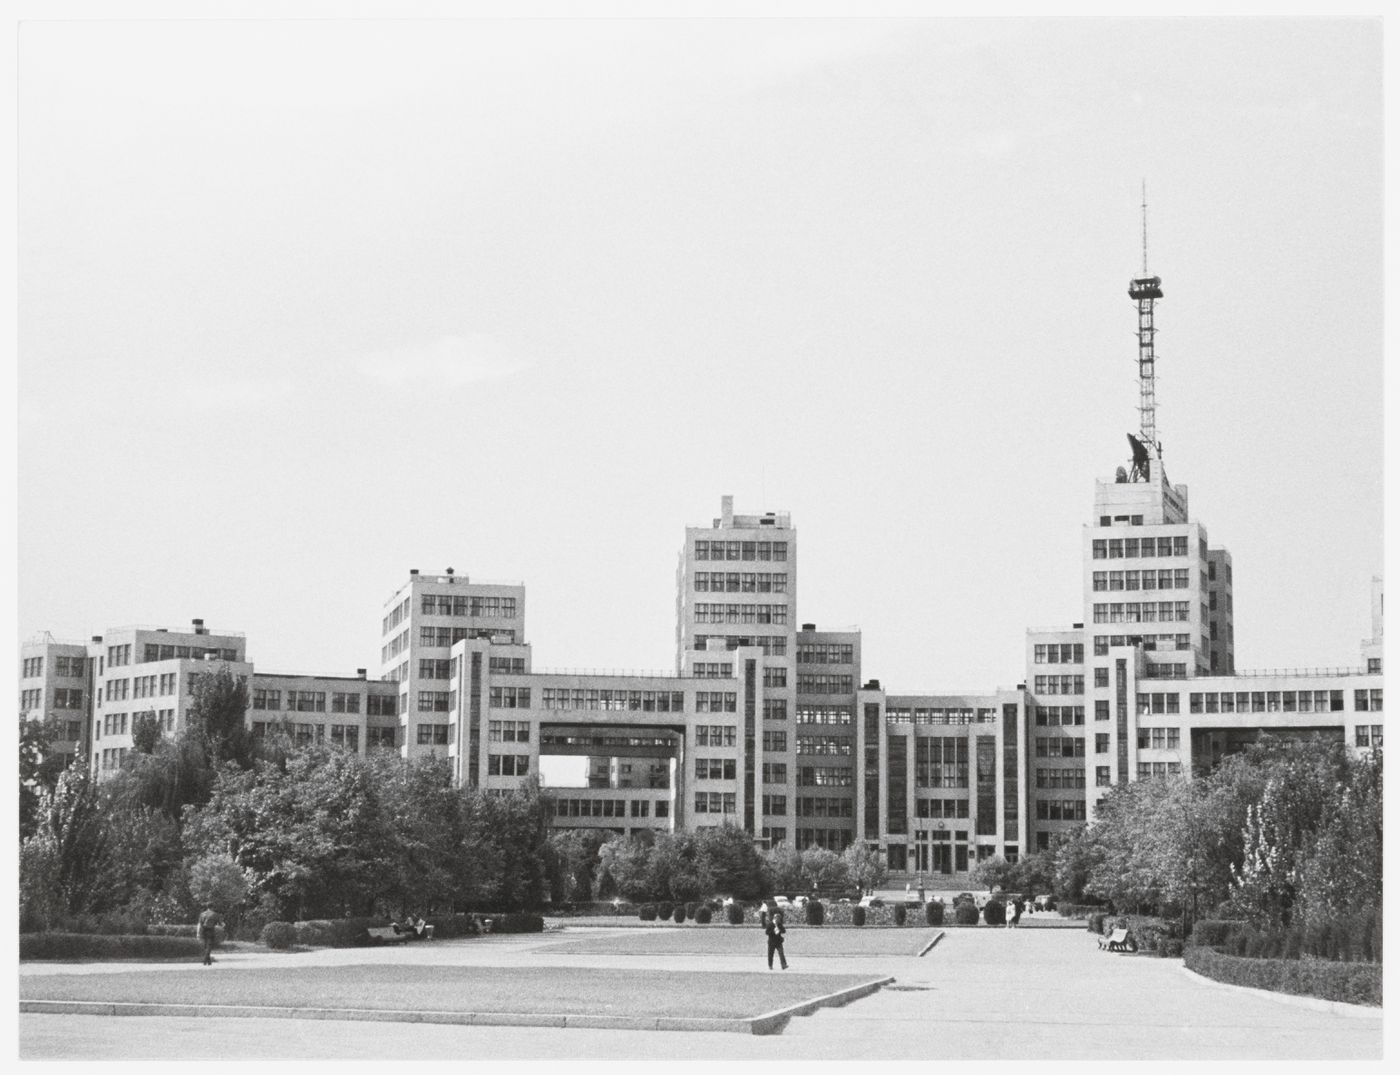 Exterior view of Department of Industry and Planning (Gosprom) buildings from Dzerzhinskaya Square, Kharkov, Soviet Union (now in Ukraine)